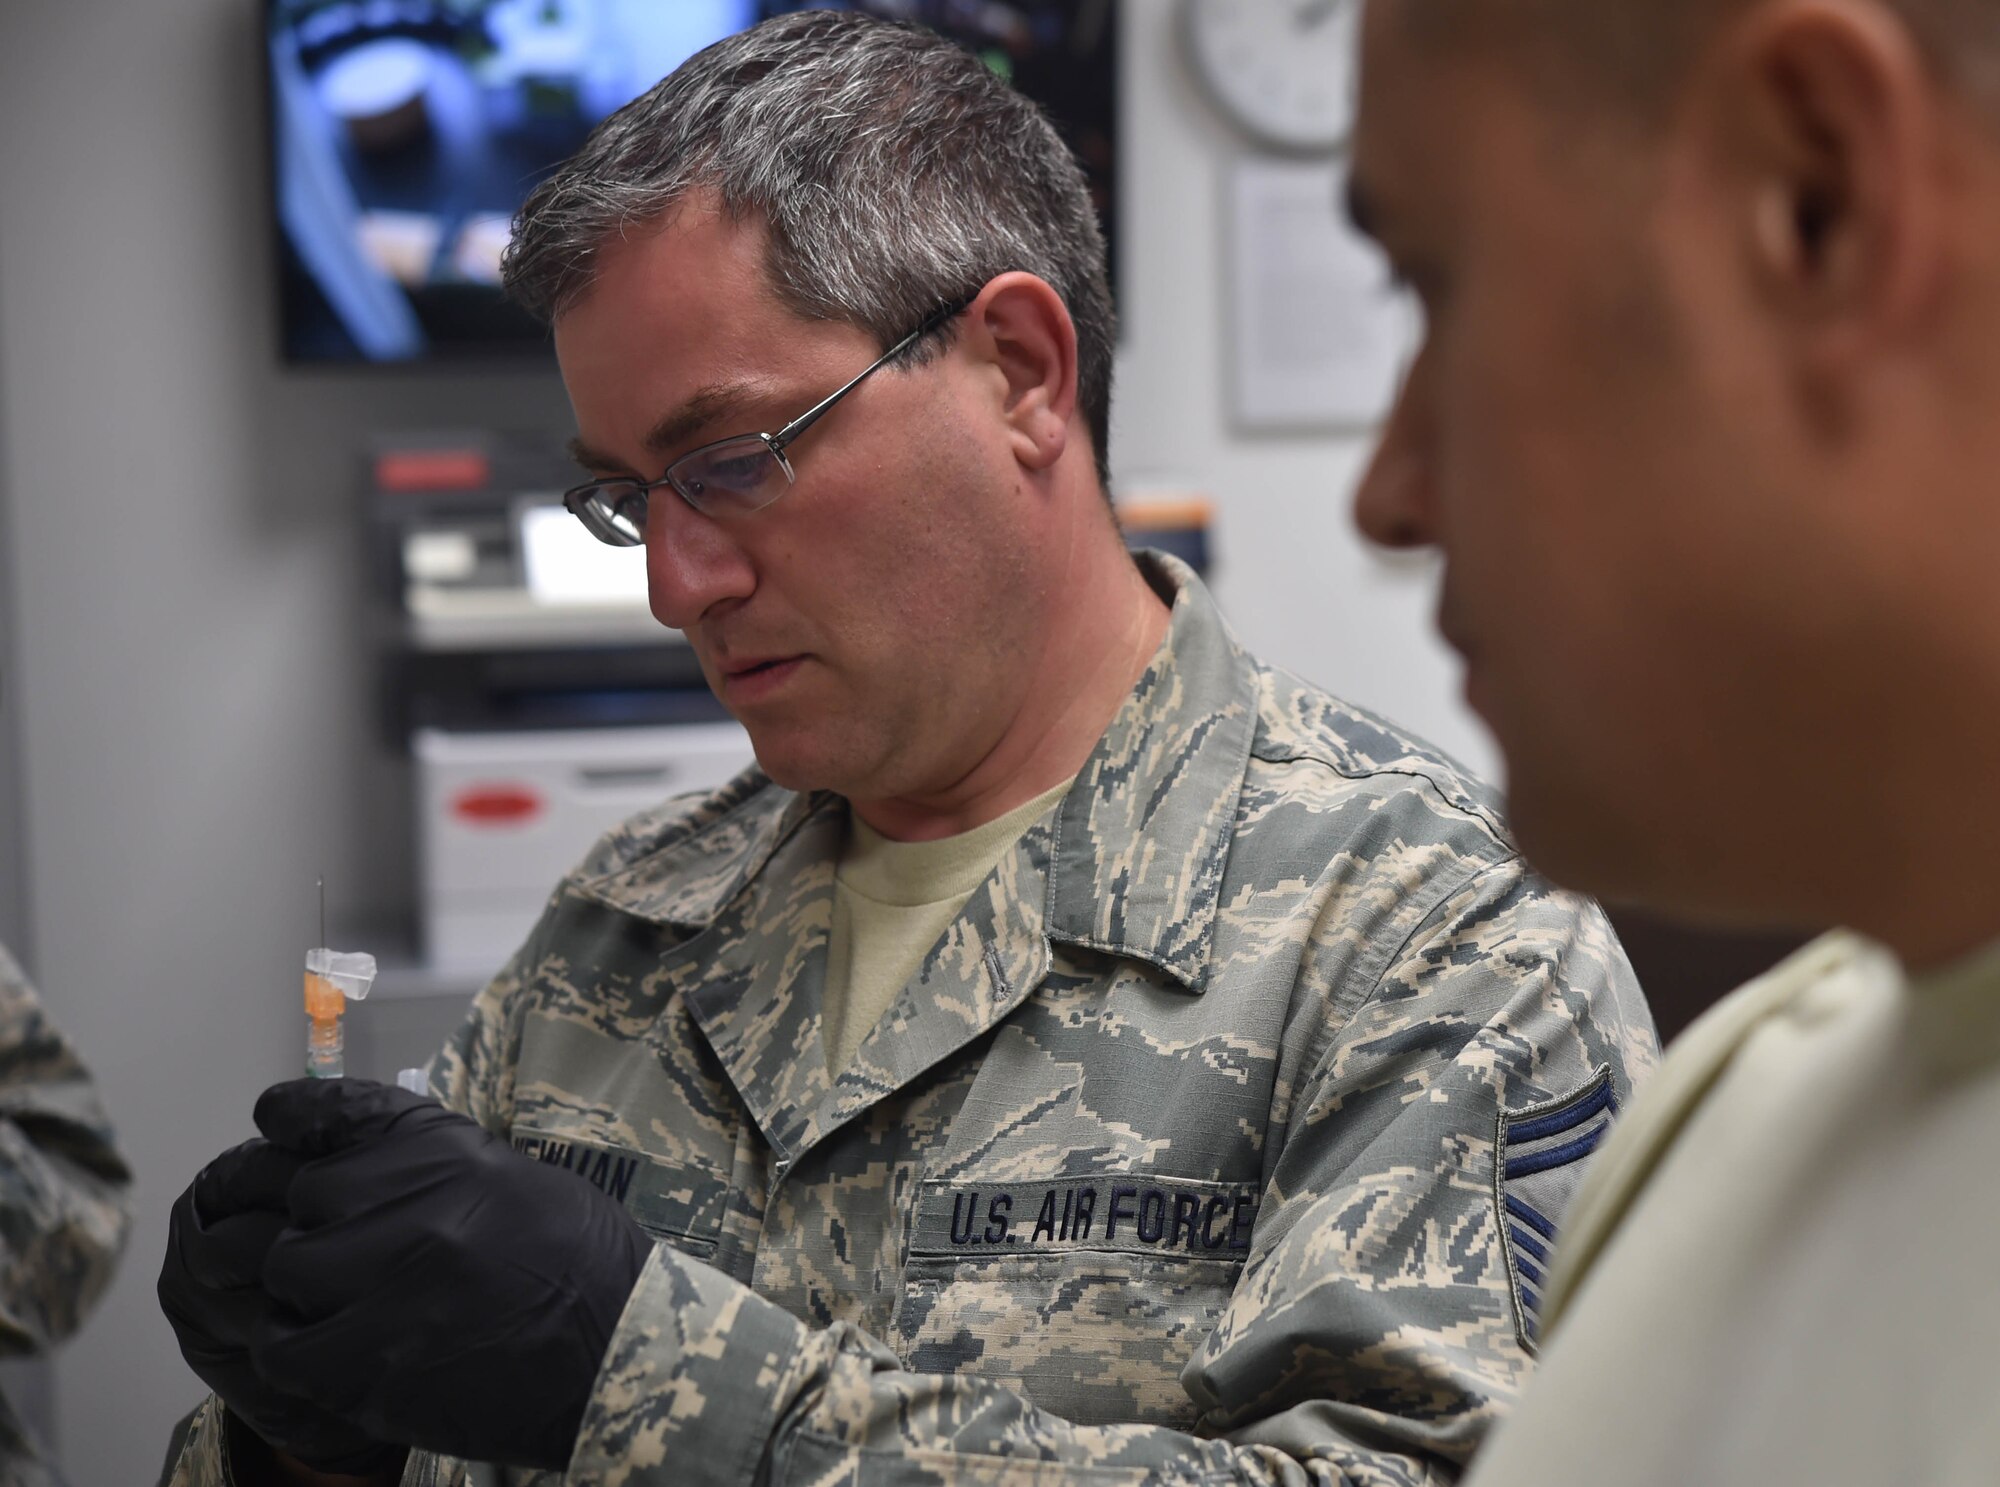 Newman received immunization augmentation training while at Spangdahlem in order to better assist the needs of the Airmen back home at Youngstown Air Reserve Station.